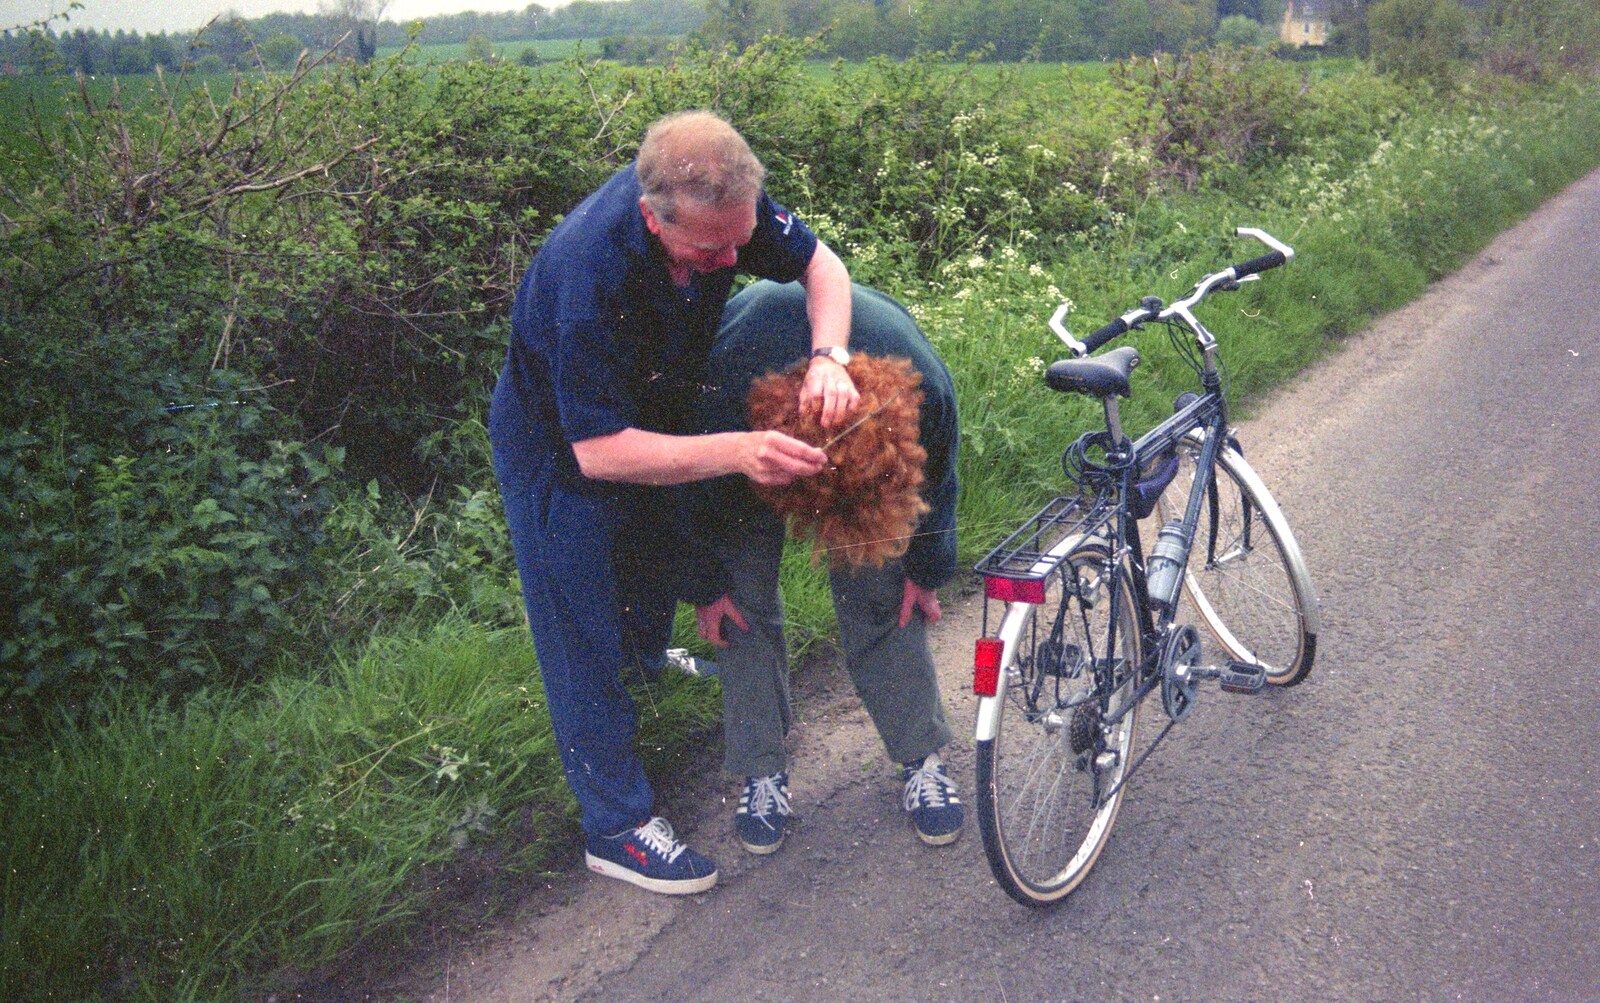 John Willy picks twigs out of Wavy's hair from A BSCC Bike Ride, Brockdish Greyhound and Hoxne Swan, Suffolk - 4th May 2000